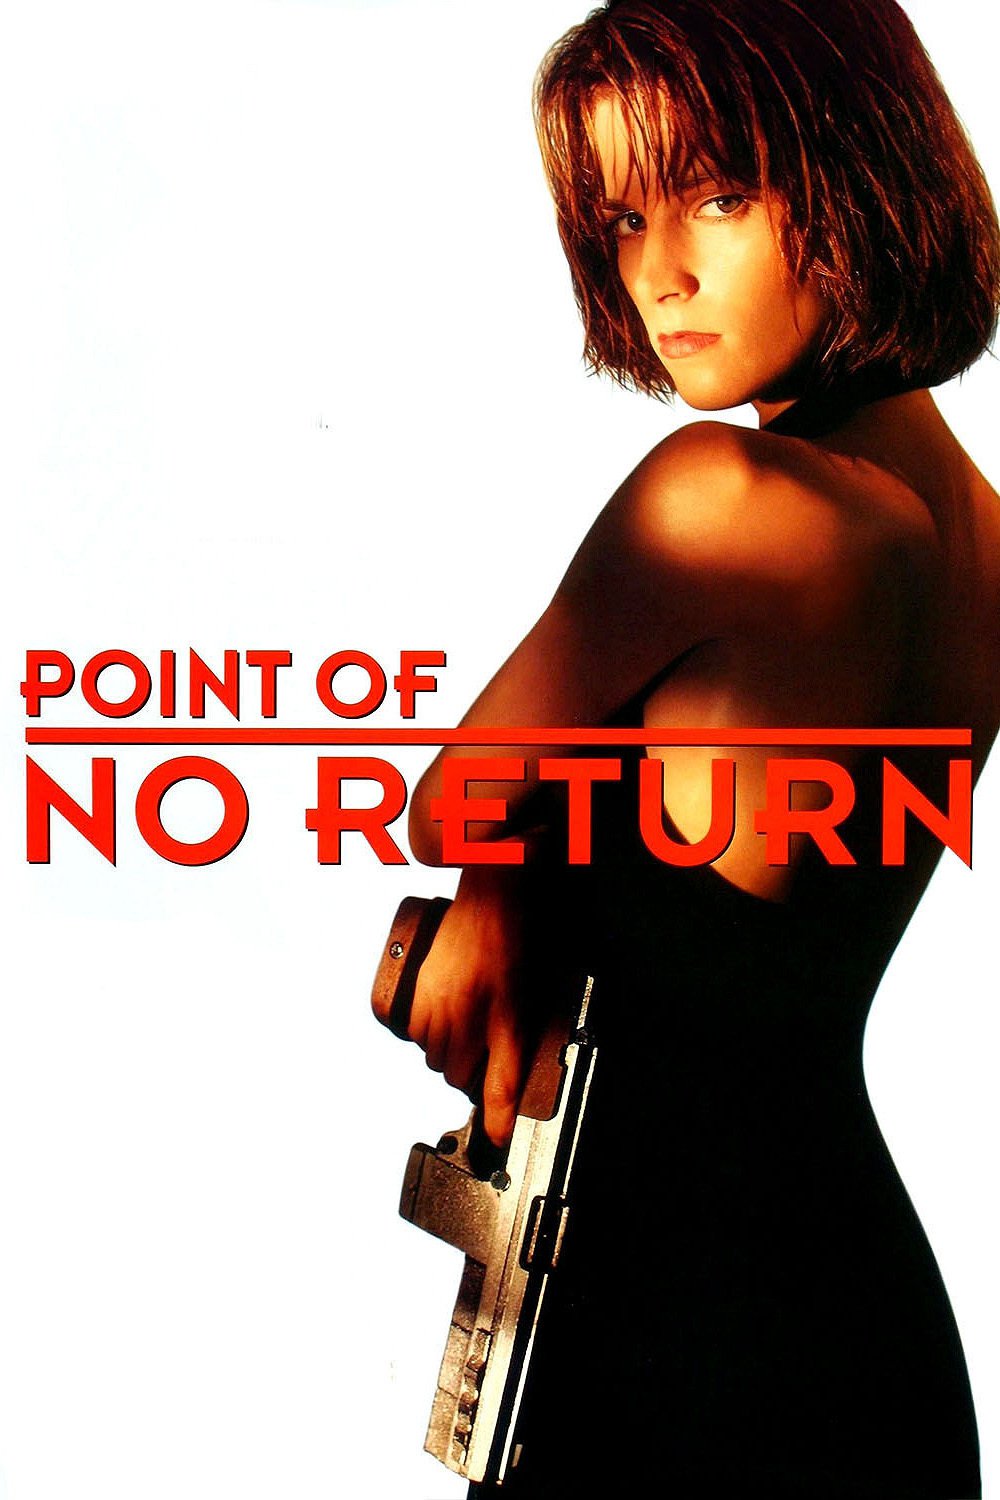 Poster for the movie "Point of No Return"